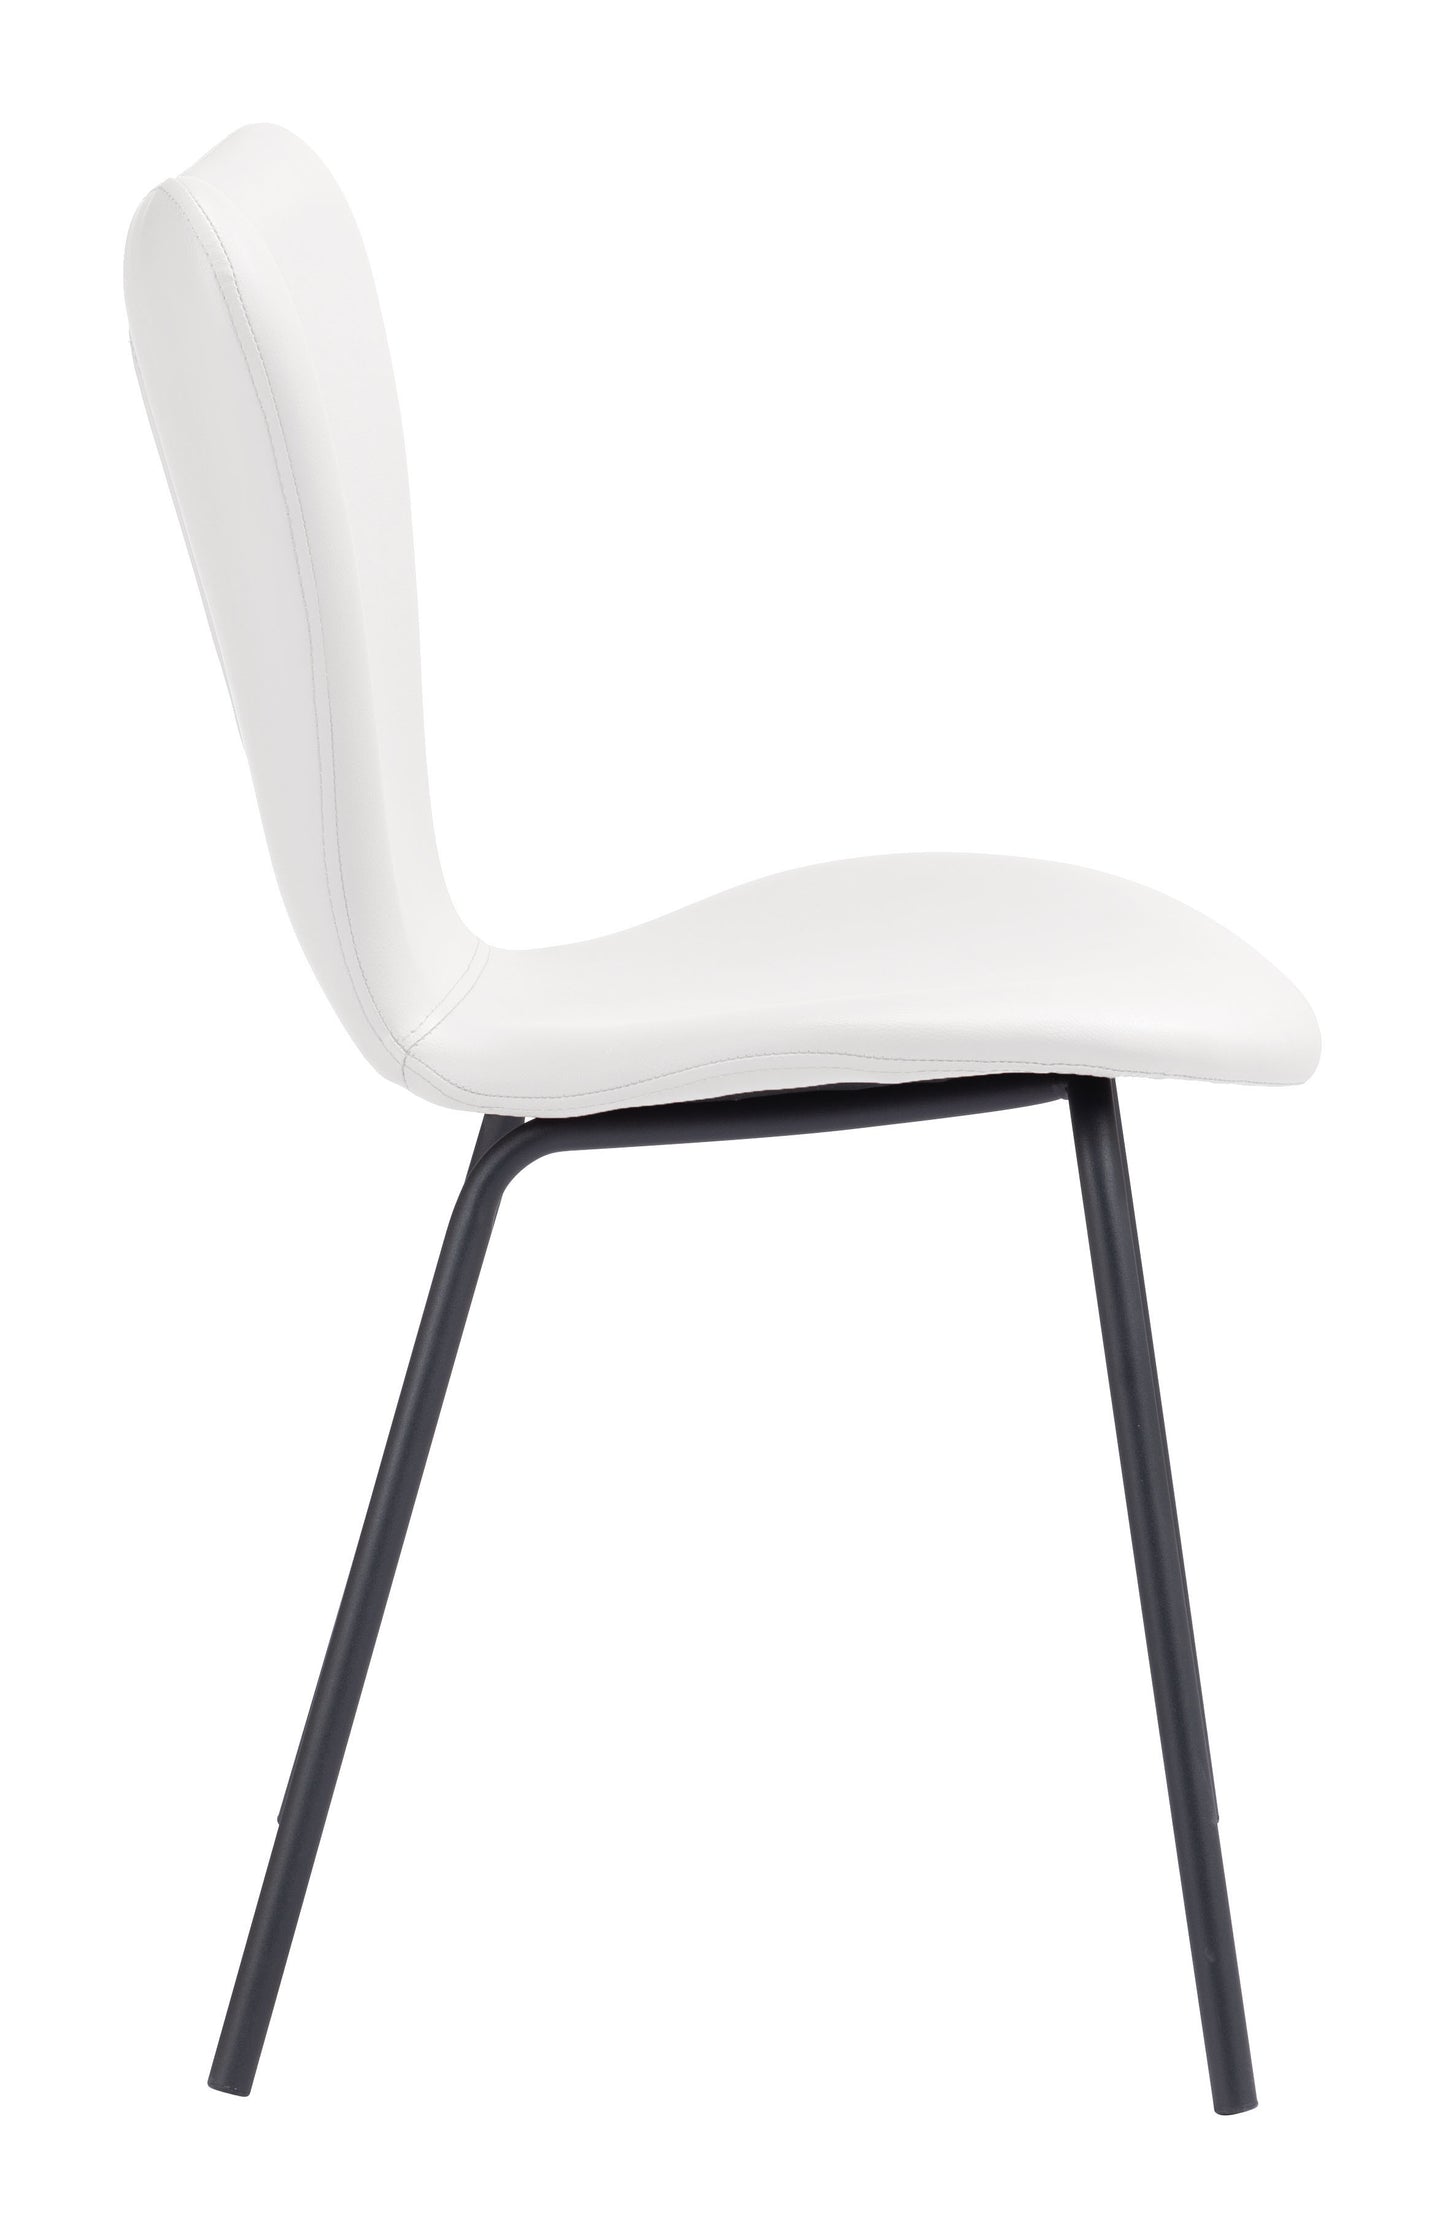 Torlo Dining Chair White (Set of 2)